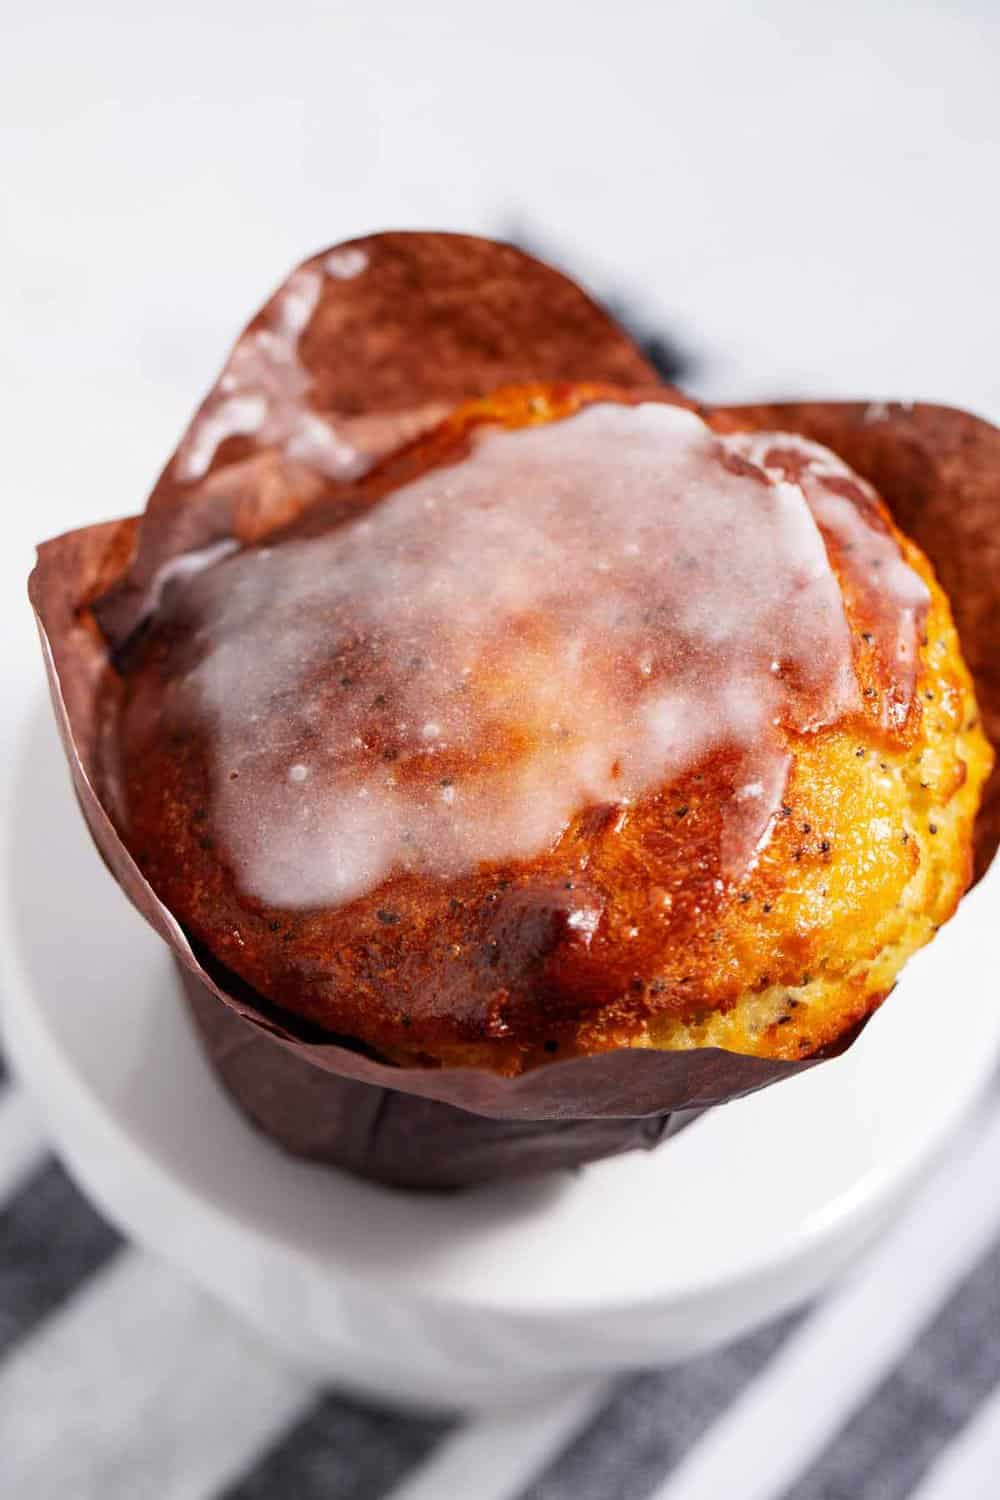 bakery style muffin with glaze